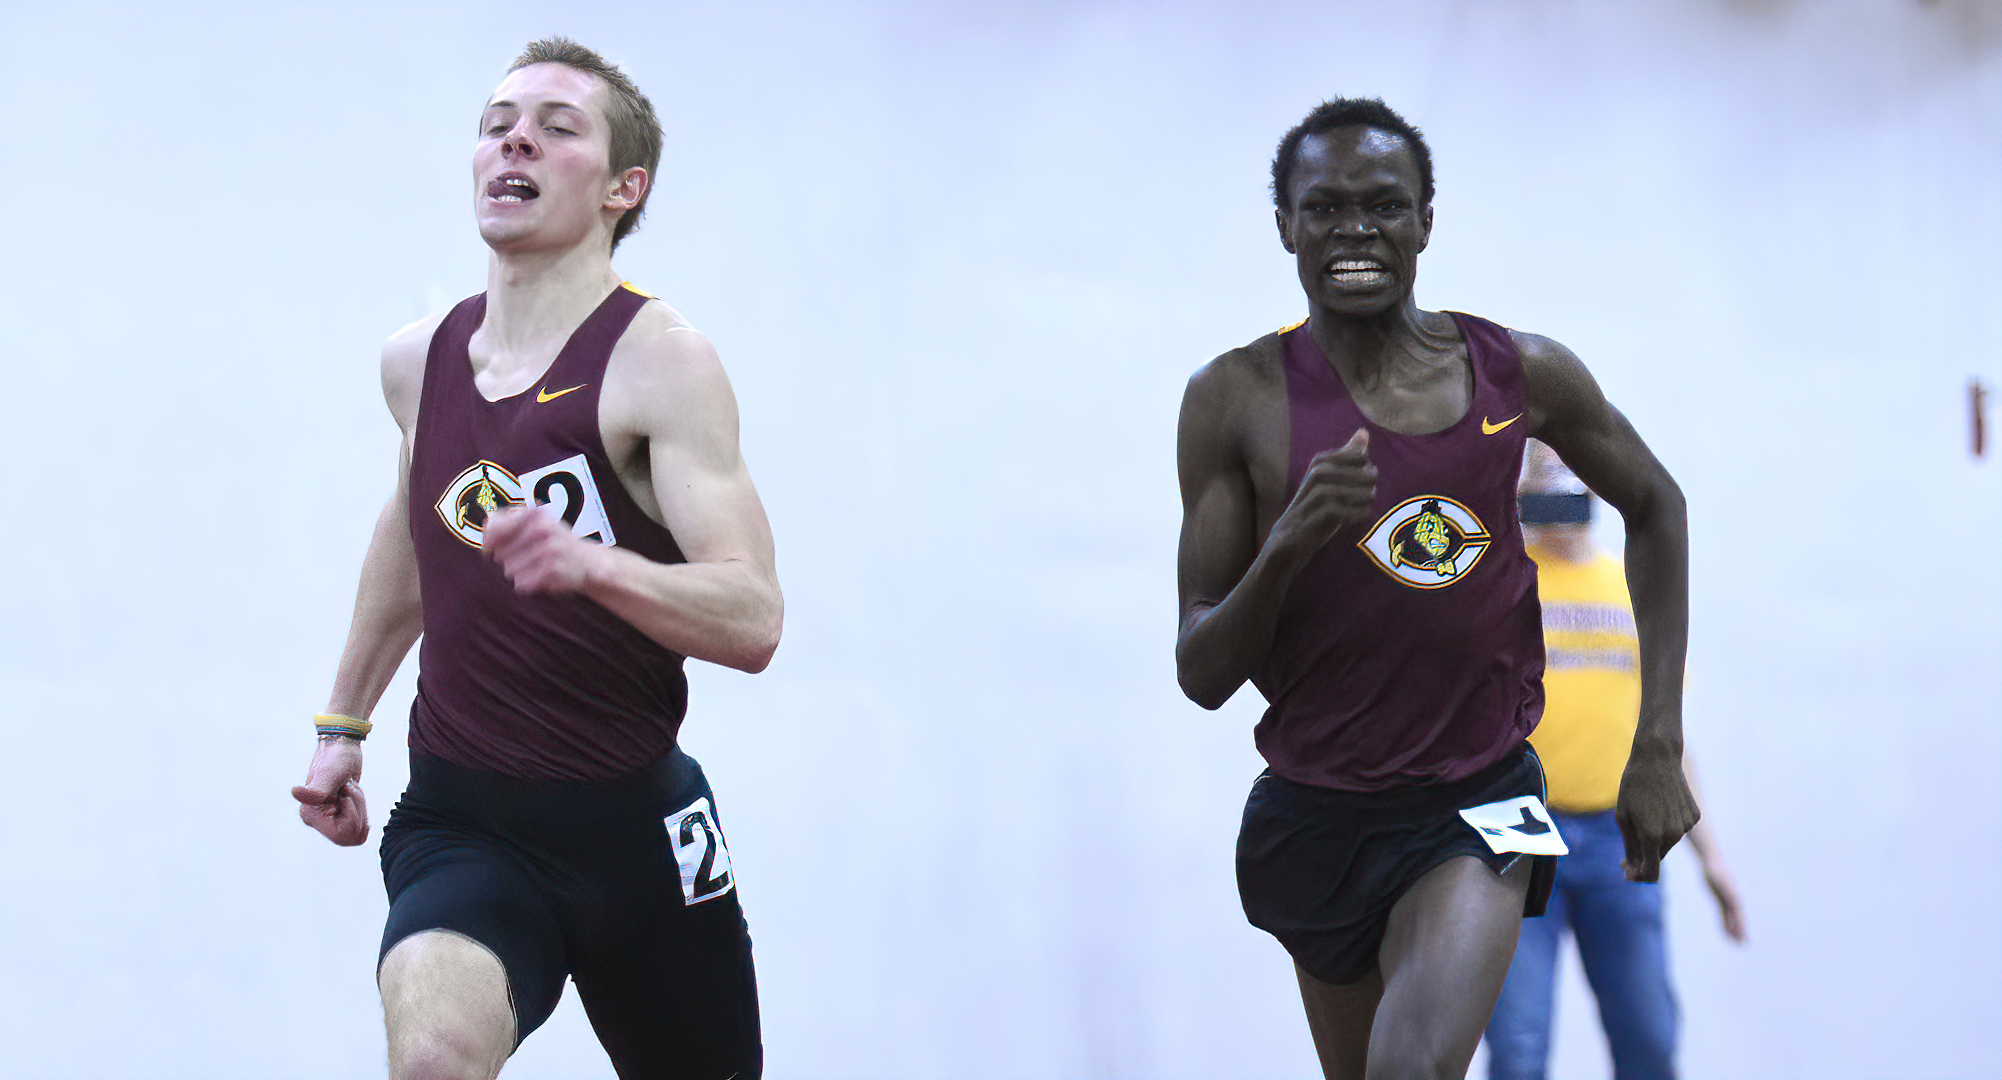 Senior All-Americans Jesse Middendorf (L) and Munir Isahak sprint towards the finish in the 1000 meters at the season-opening Cobber Open.